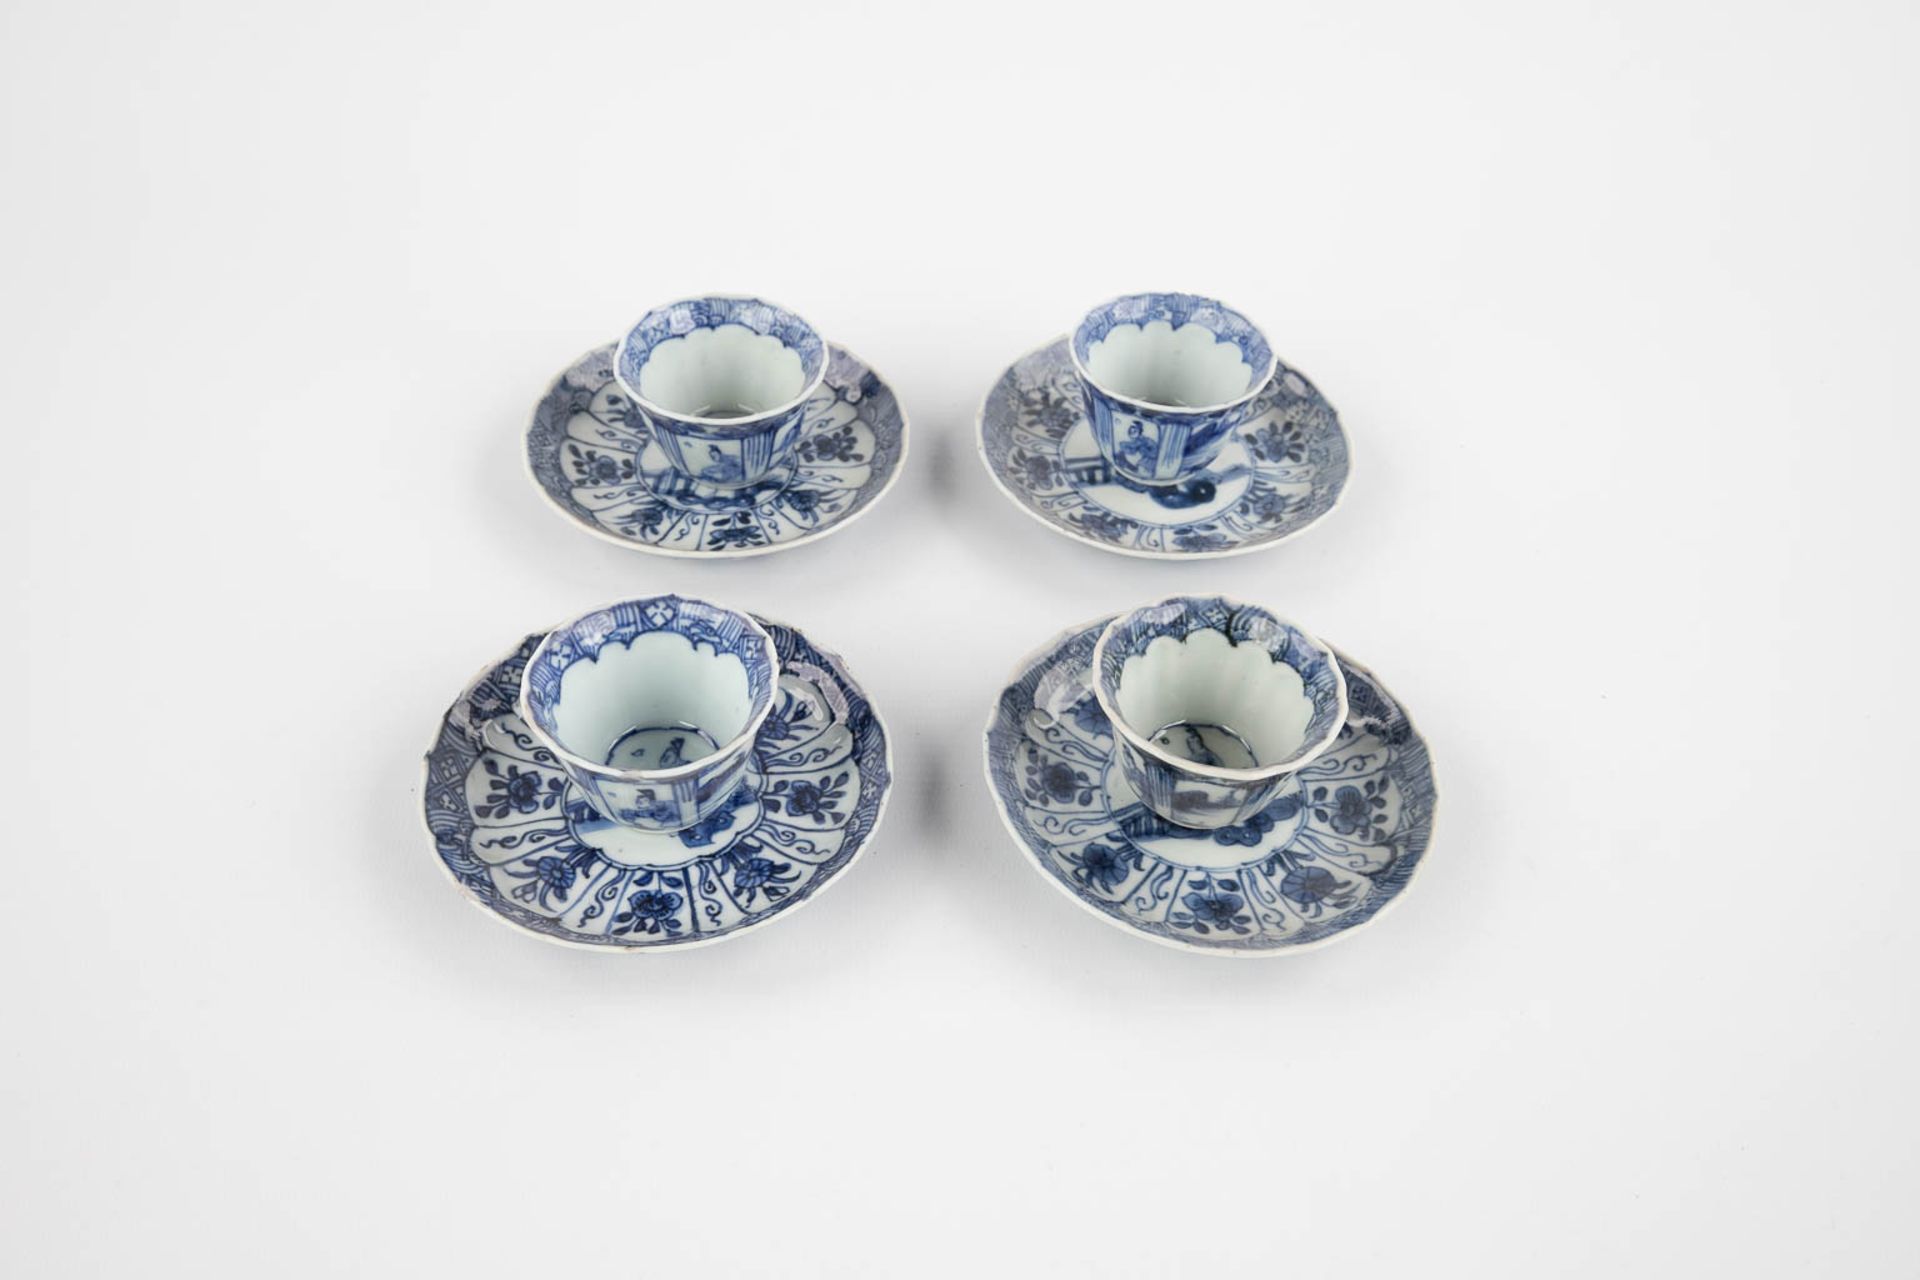 A collection of Chinese and Japanese porcelain, Imari, Blue-white, Famille Rose. 19th/20th C. (D:21 - Image 14 of 19